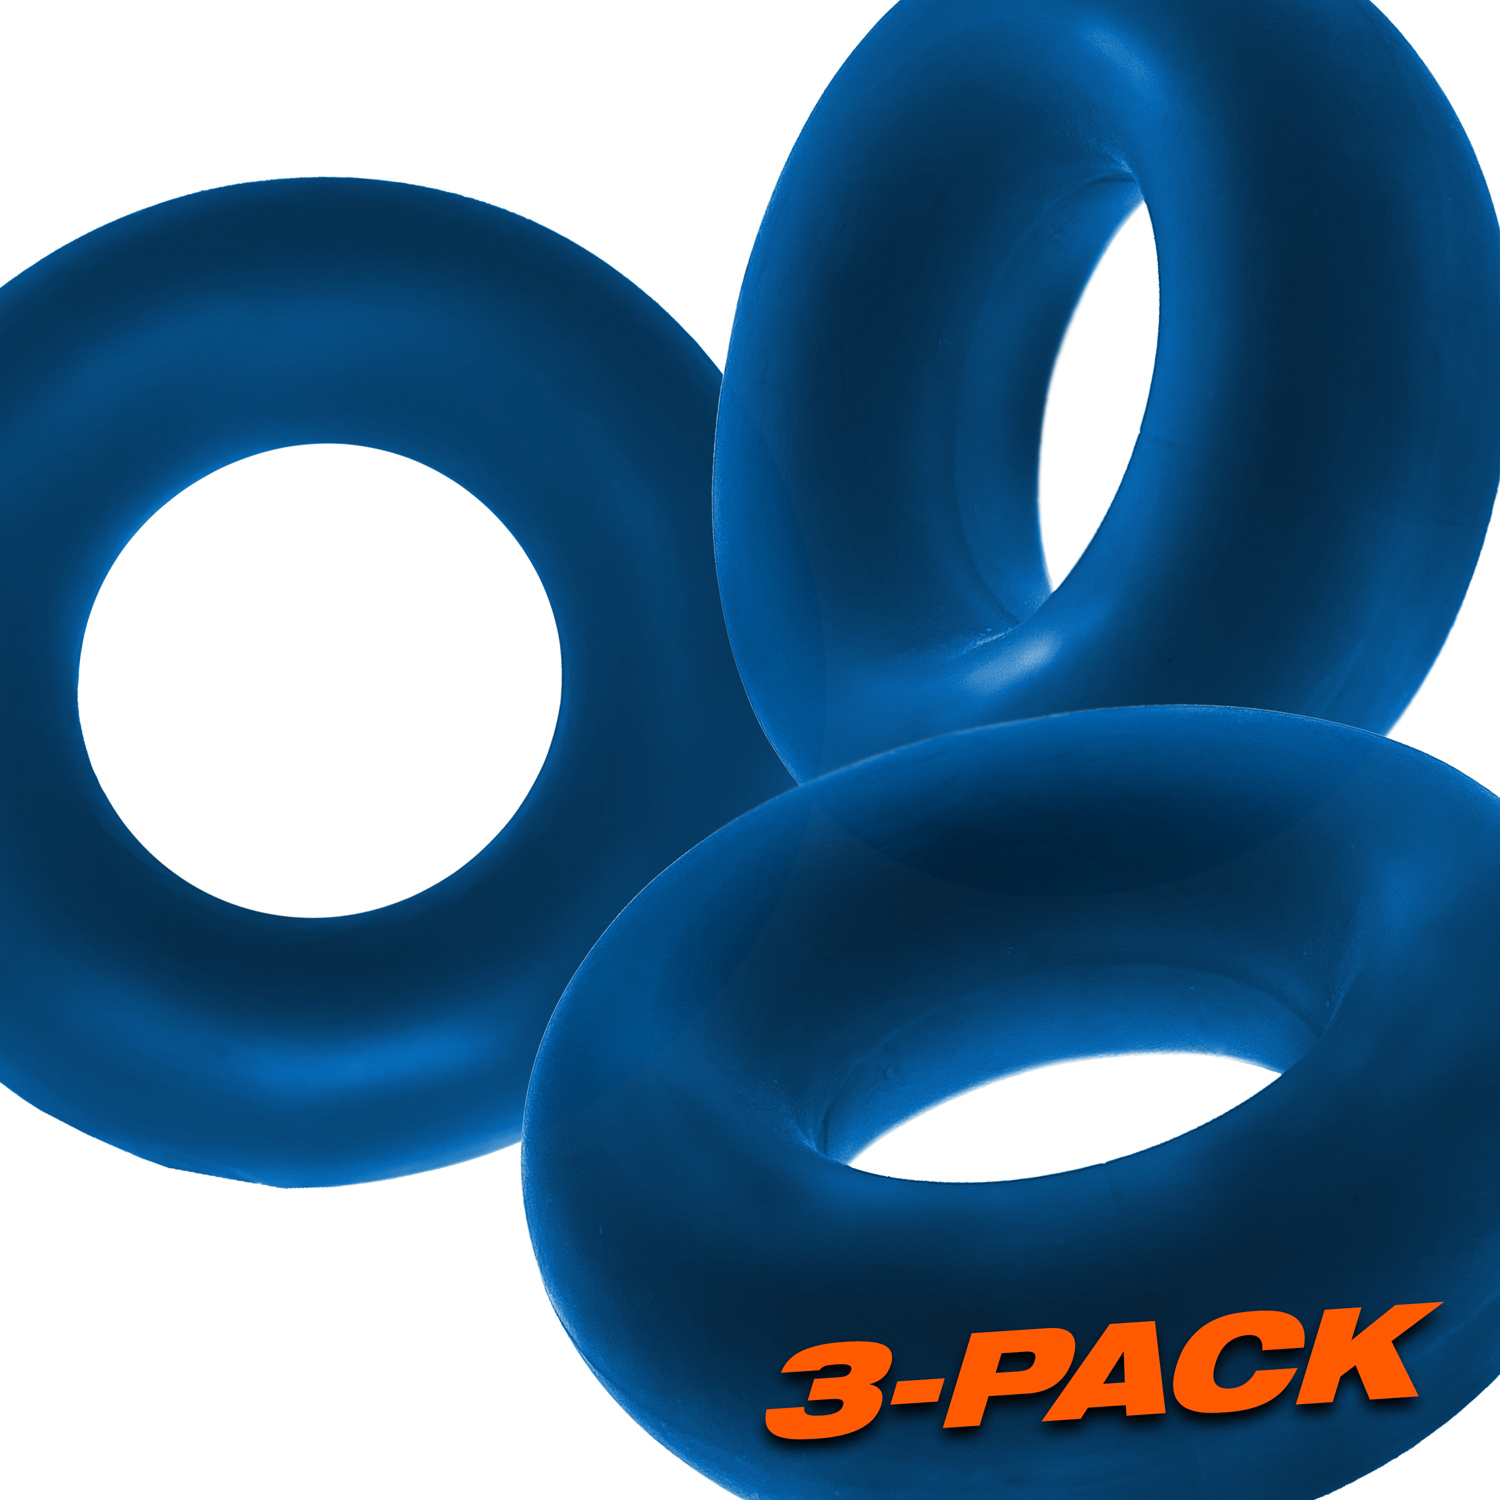 fat willy  pack jumbo c rings space blue 